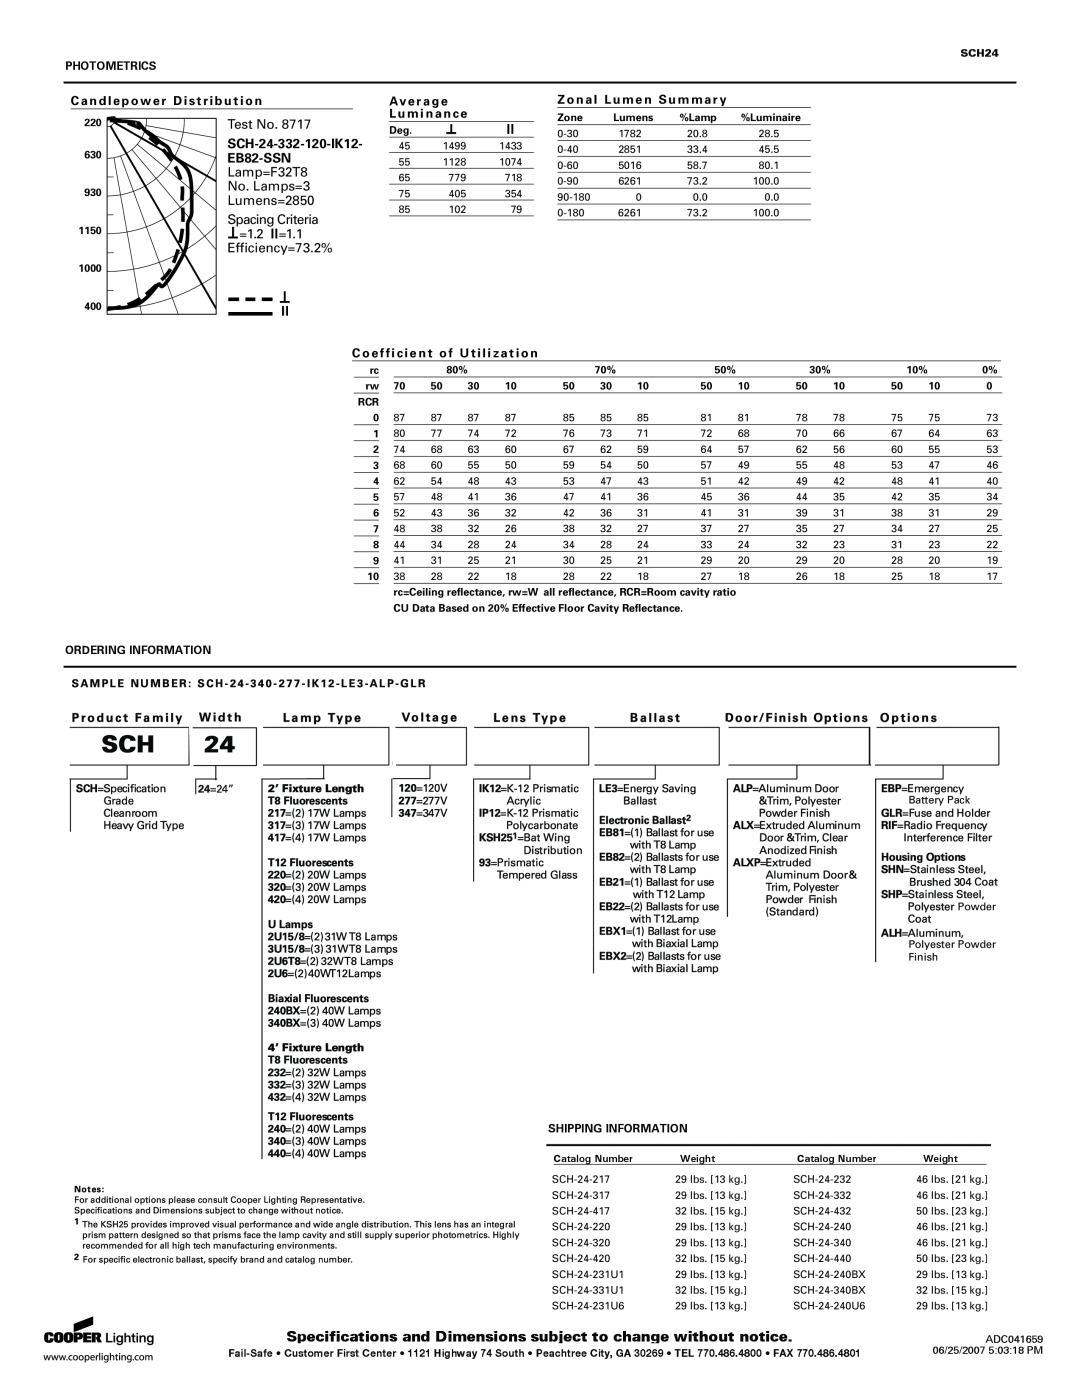 Cooper Lighting SCH24 Specifications and Dimensions subject to change without notice, Test No, SCH-24-332-120-IK12, =1.1 